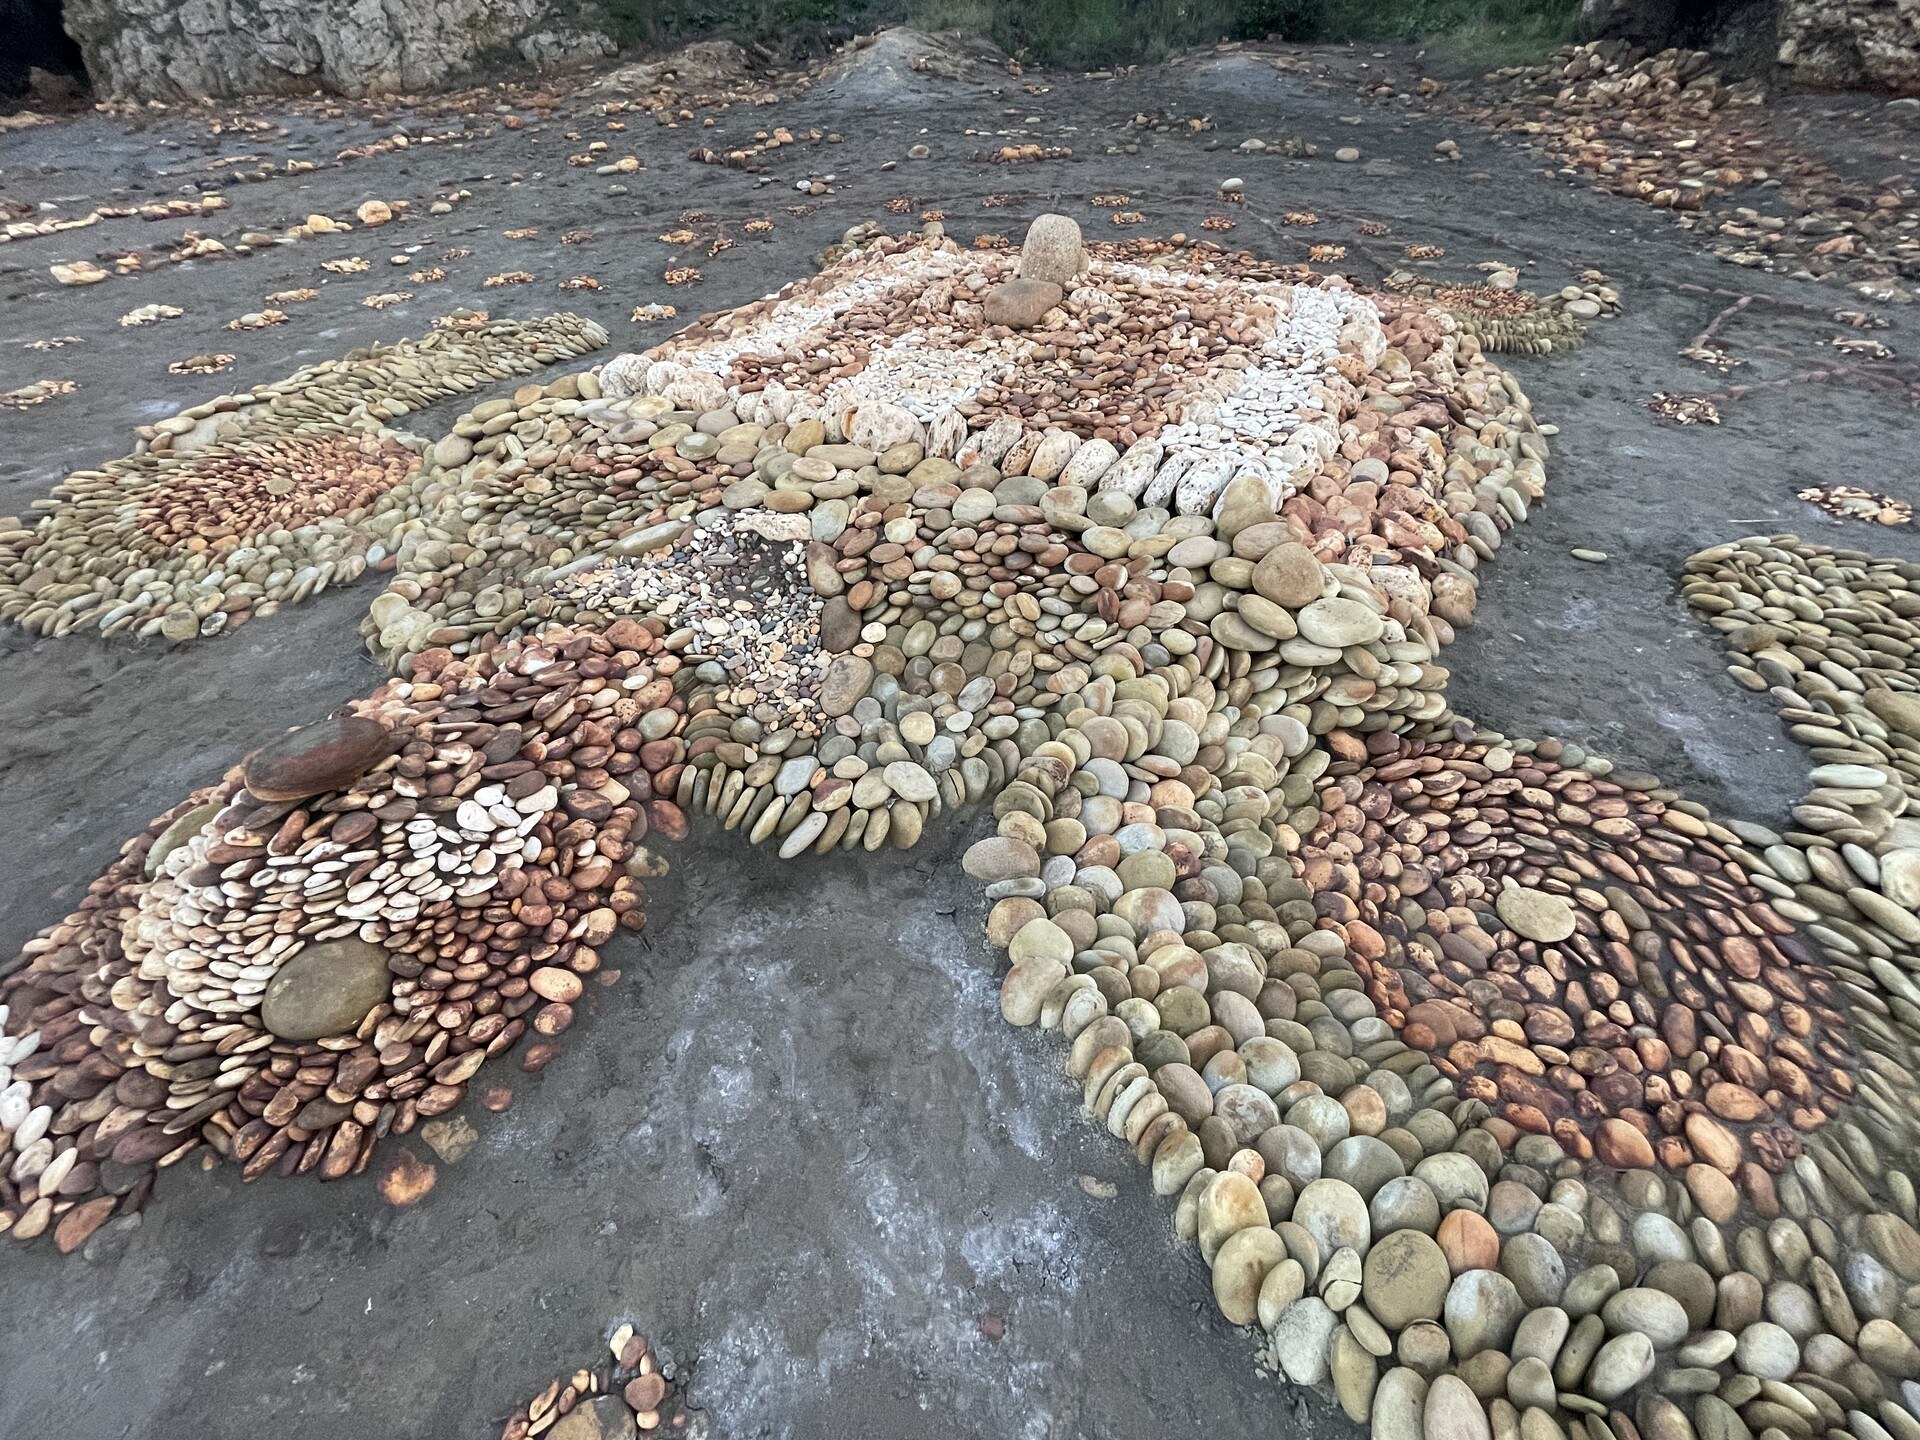 A closeup of thousands of stones in swirling patterns making up a giant sea turtle